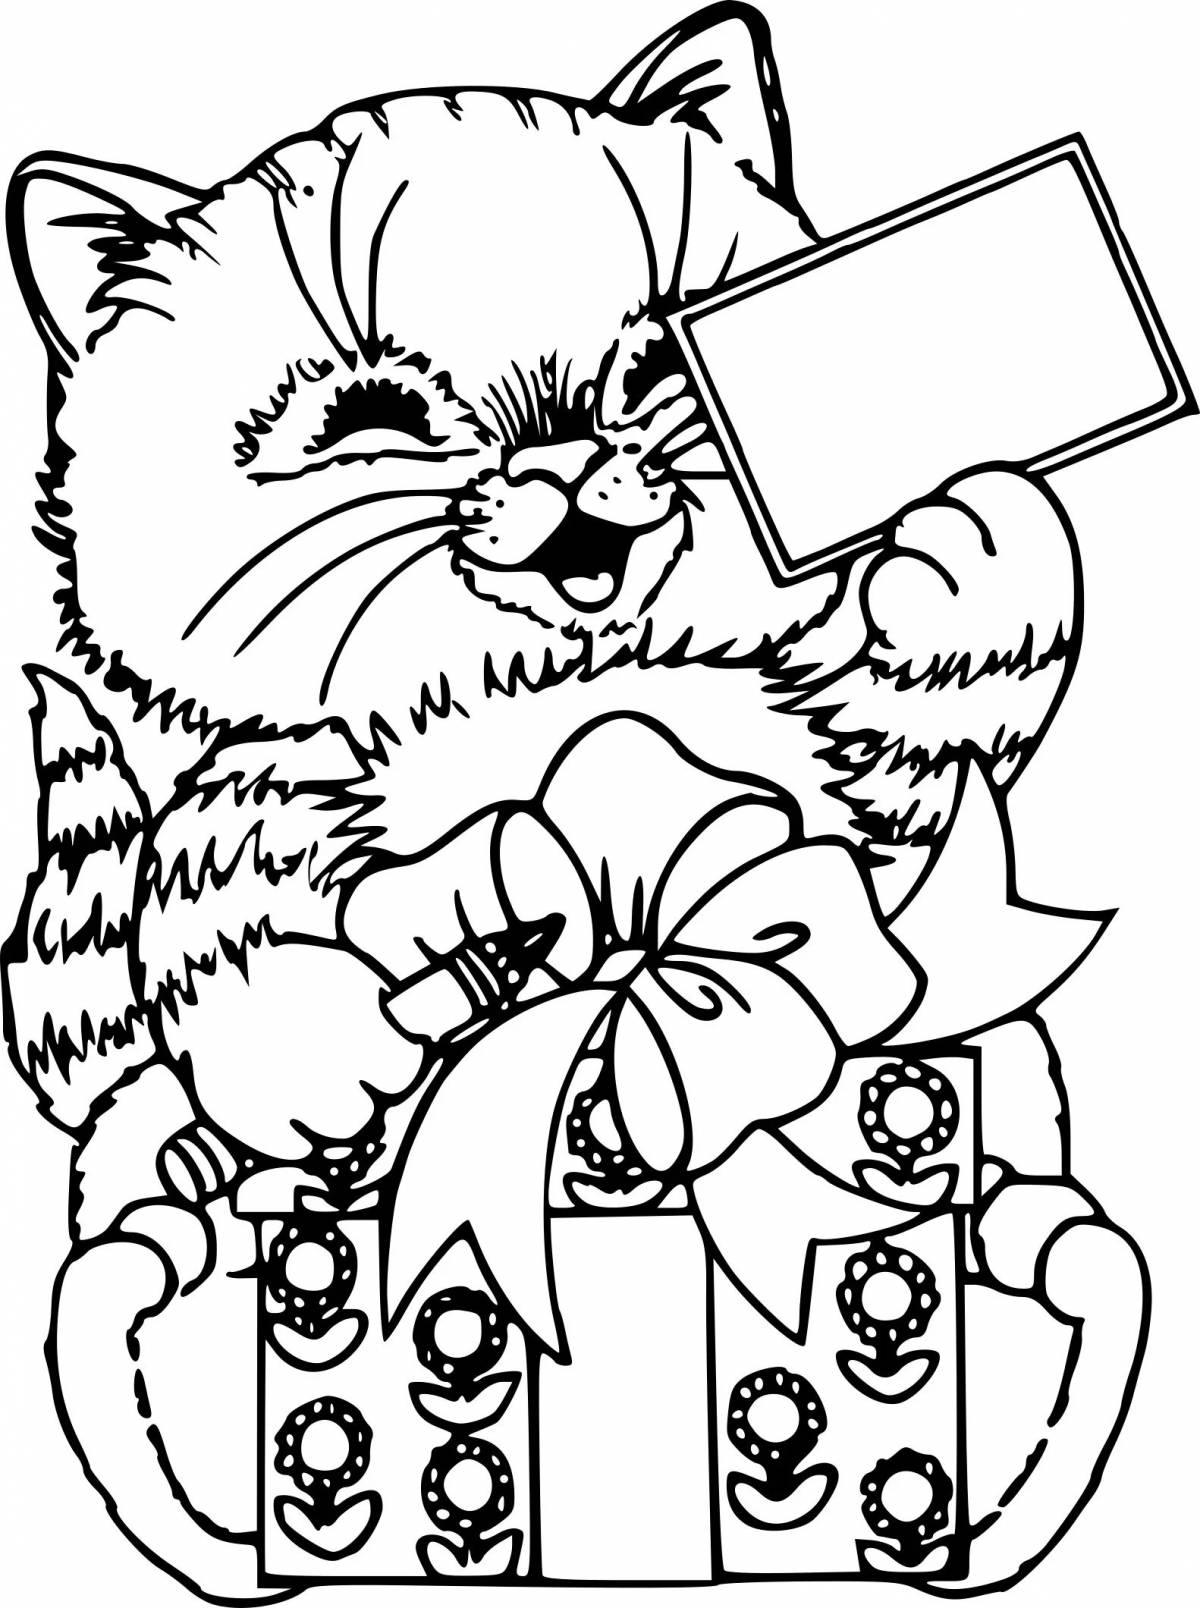 Coloring book glamor cat new year